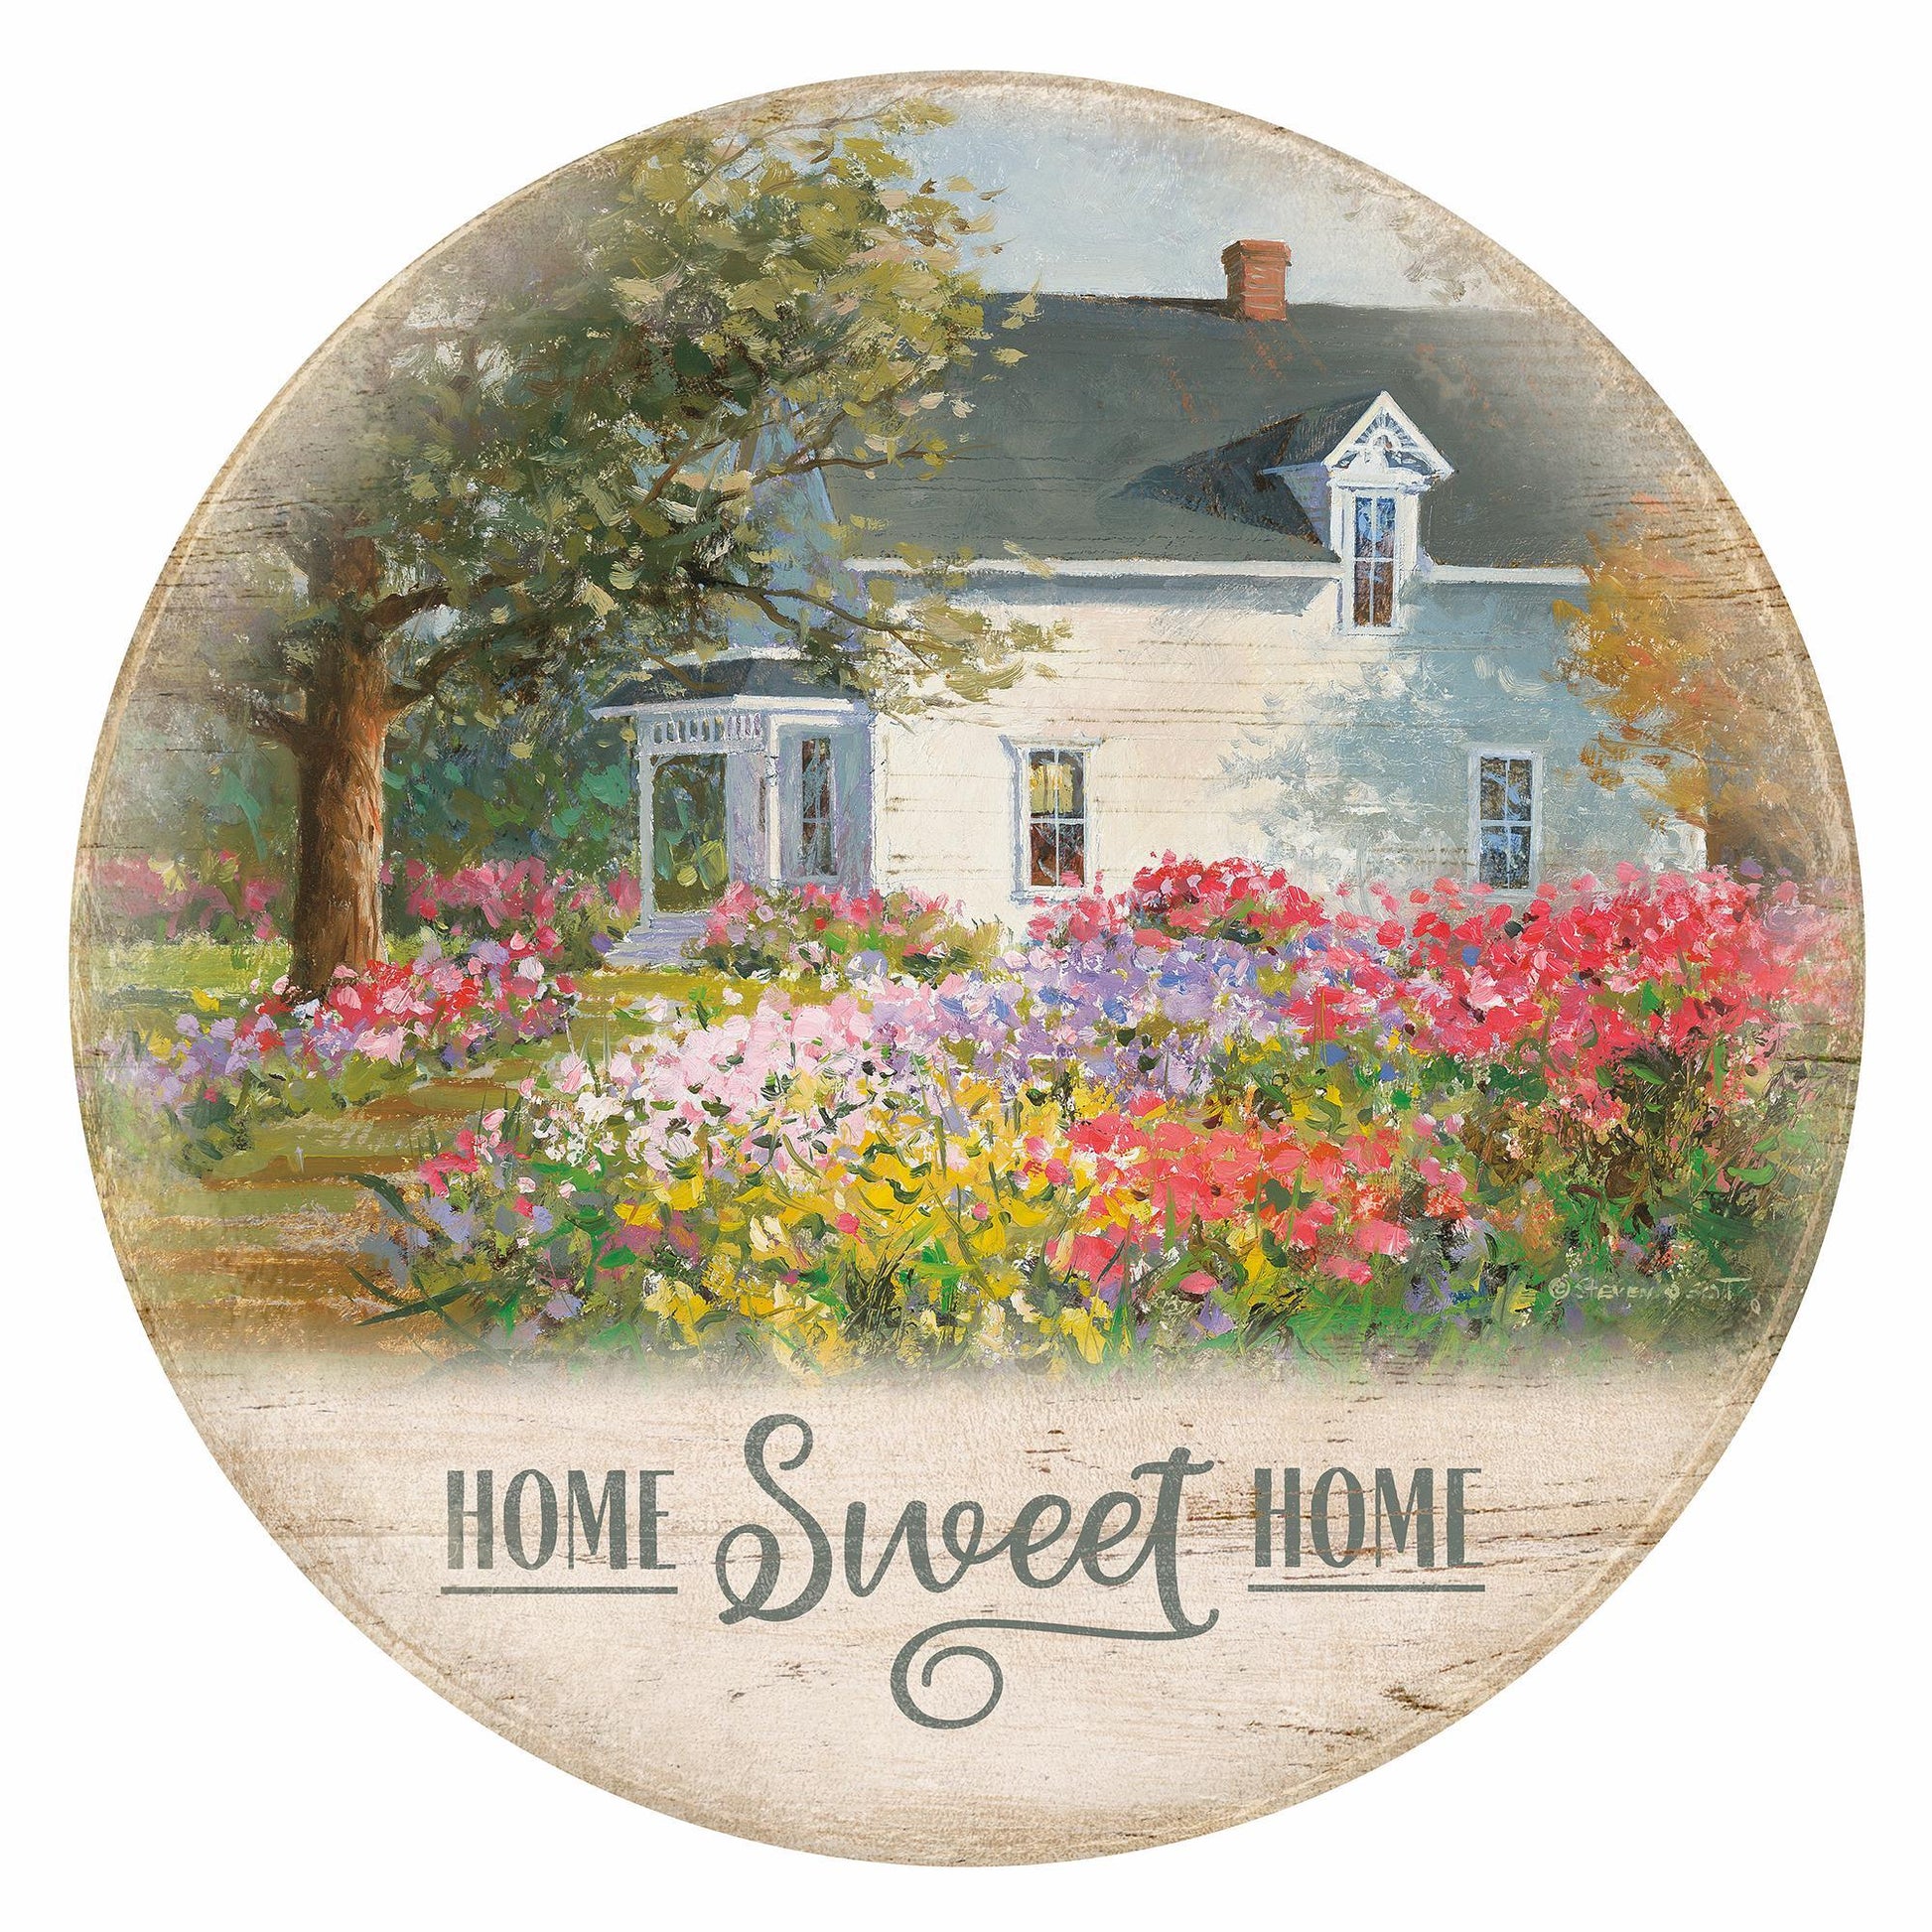 Home Sweet Home 21" Round Wood Sign - Wild Wings